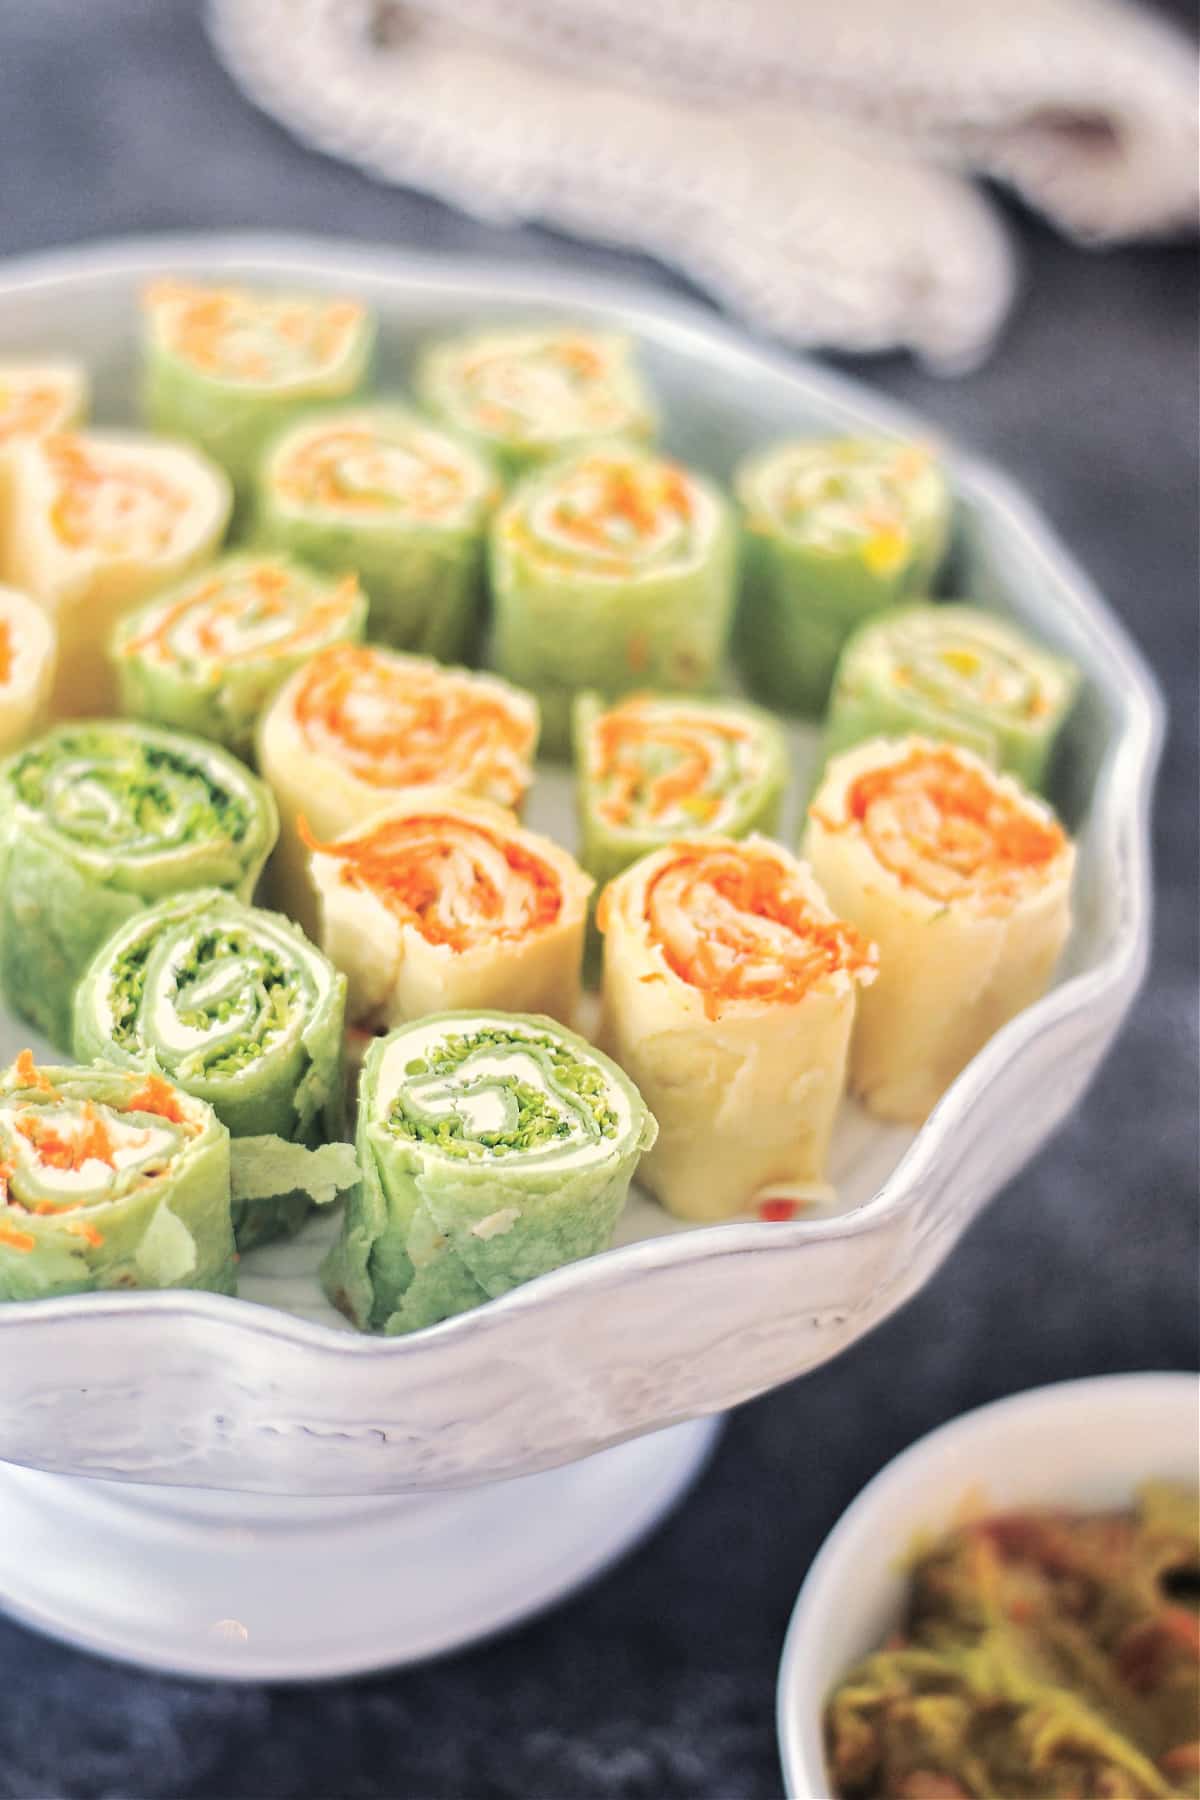 Colorful veggie pinwheels are stacked on a serving plate. Some pinwheels are made with green spinach tortillas, and some with plain white flour tortillas. All roll ups are filled with finely chopped veggies and dairy free cream cheese.